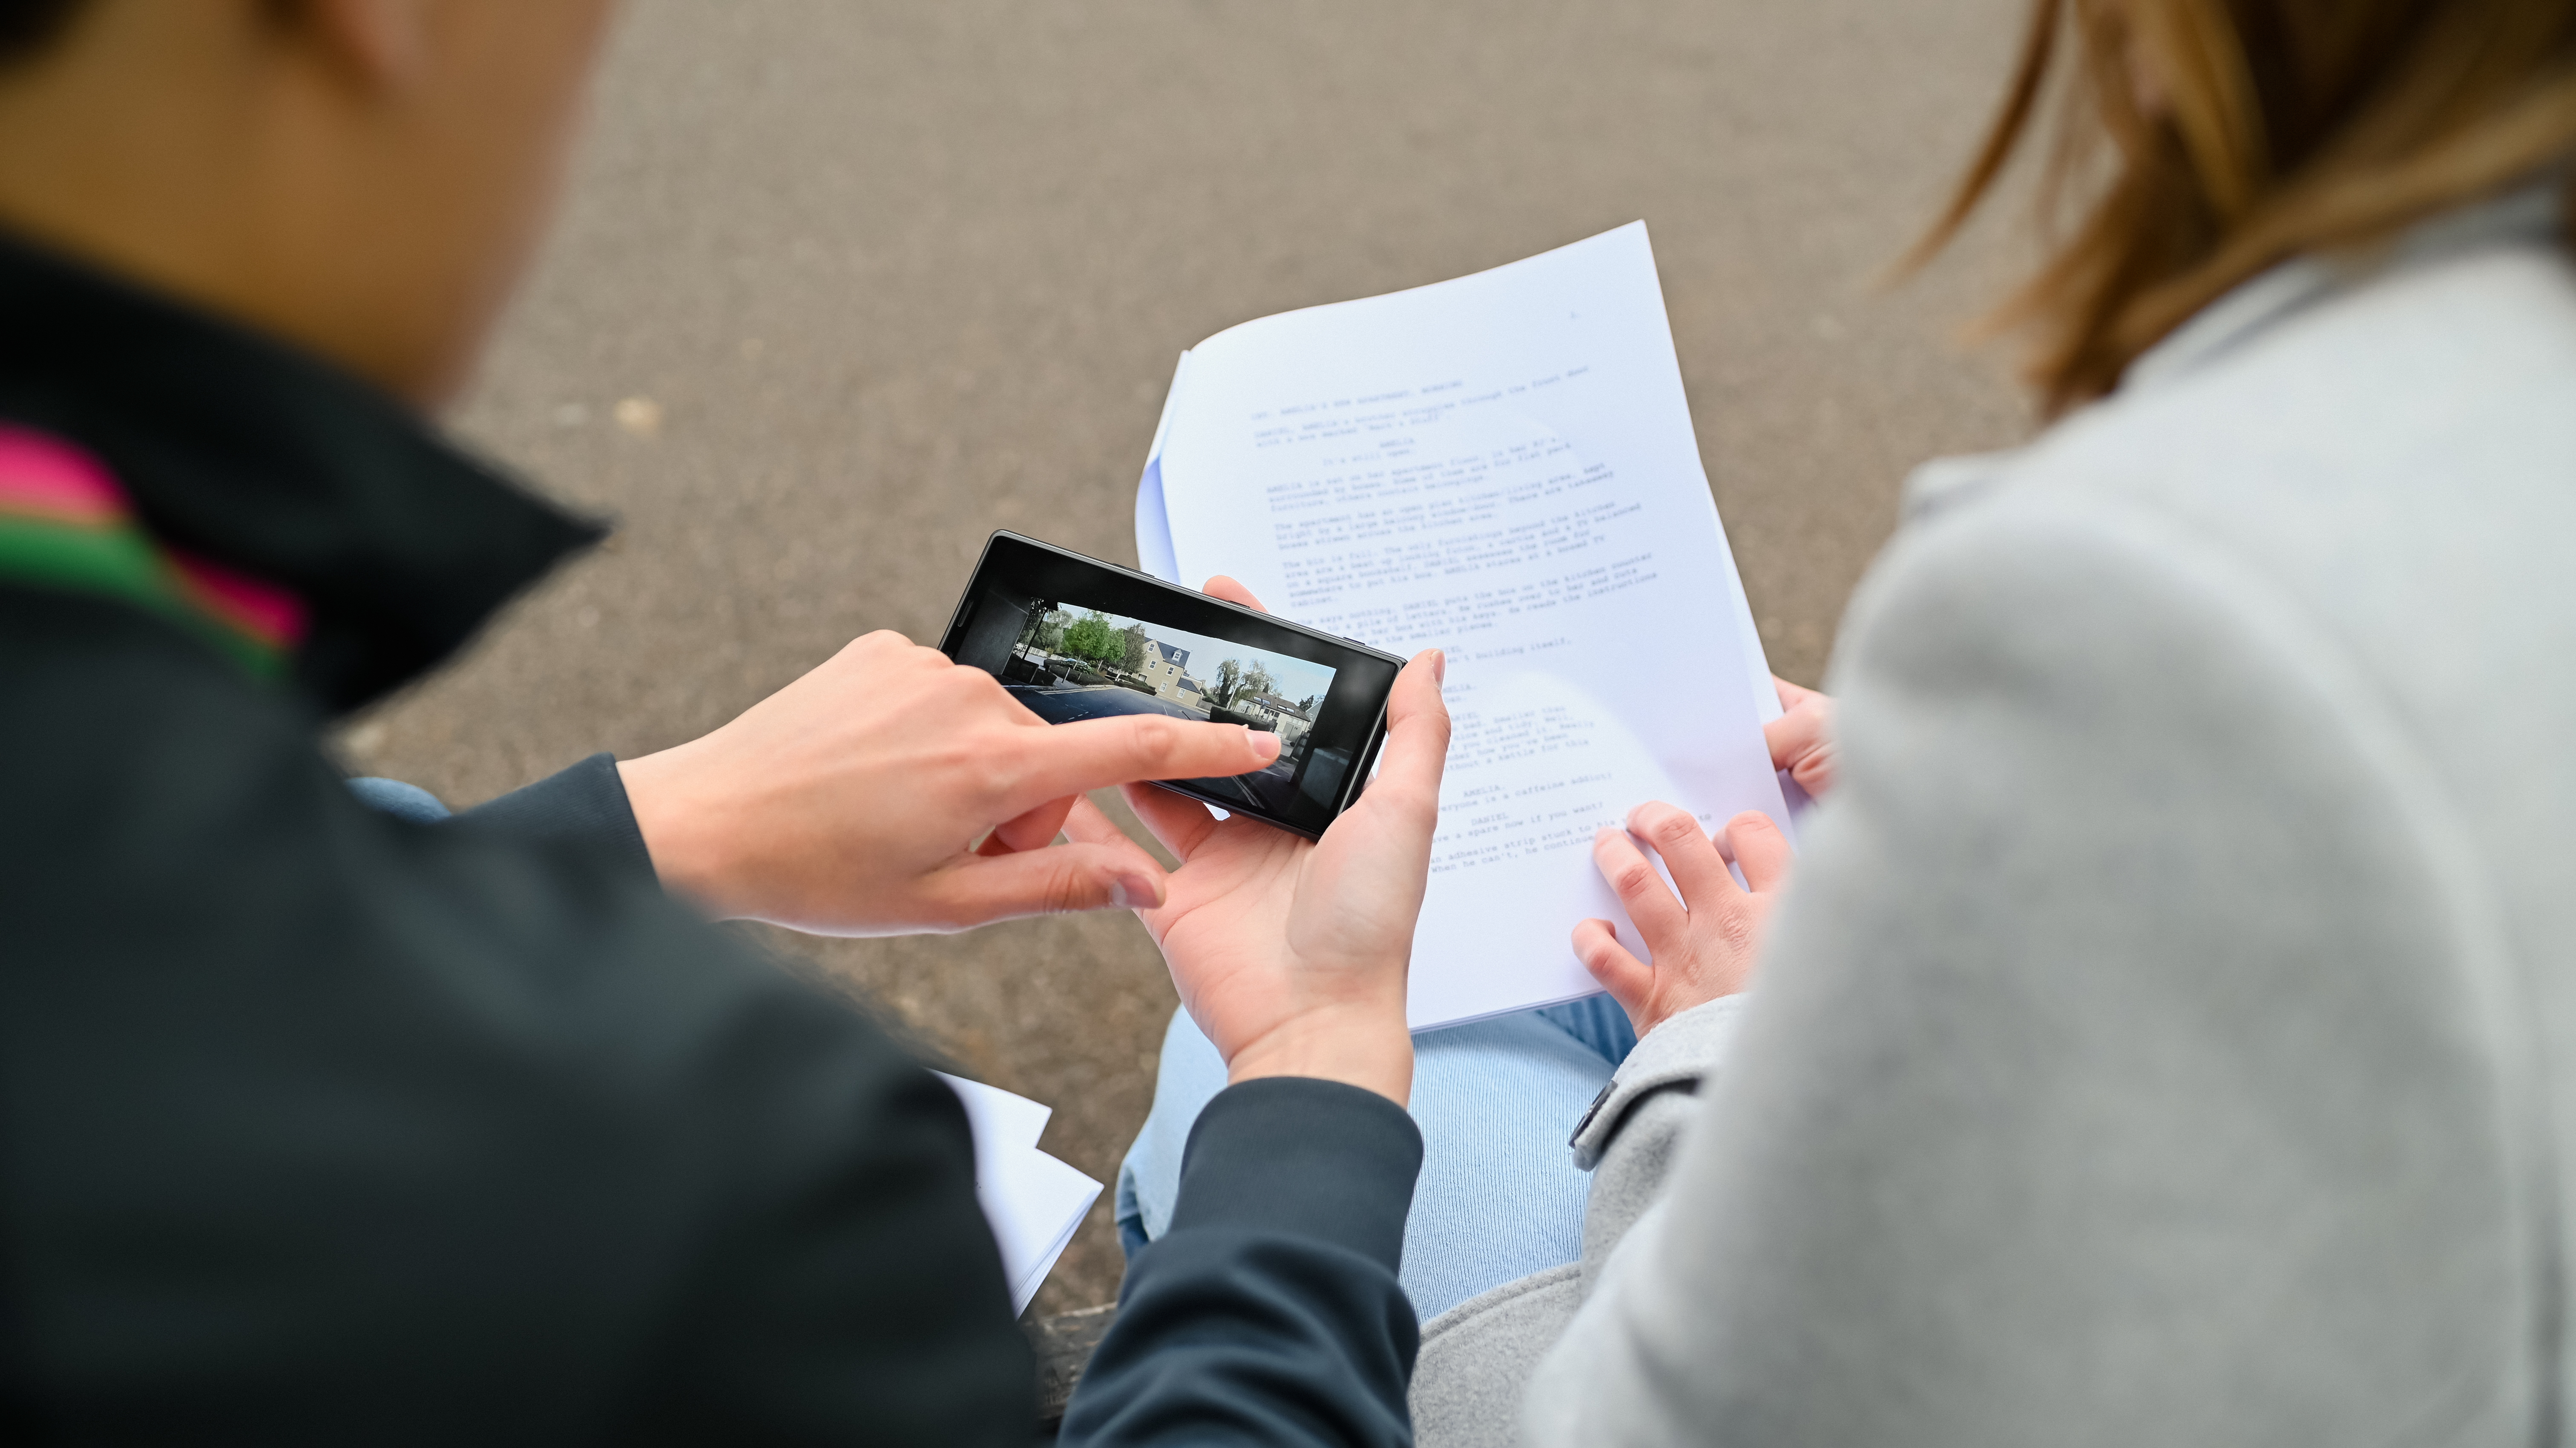 An over-the-shoulder view of a person holding a phone to review footage, while another consults a script.